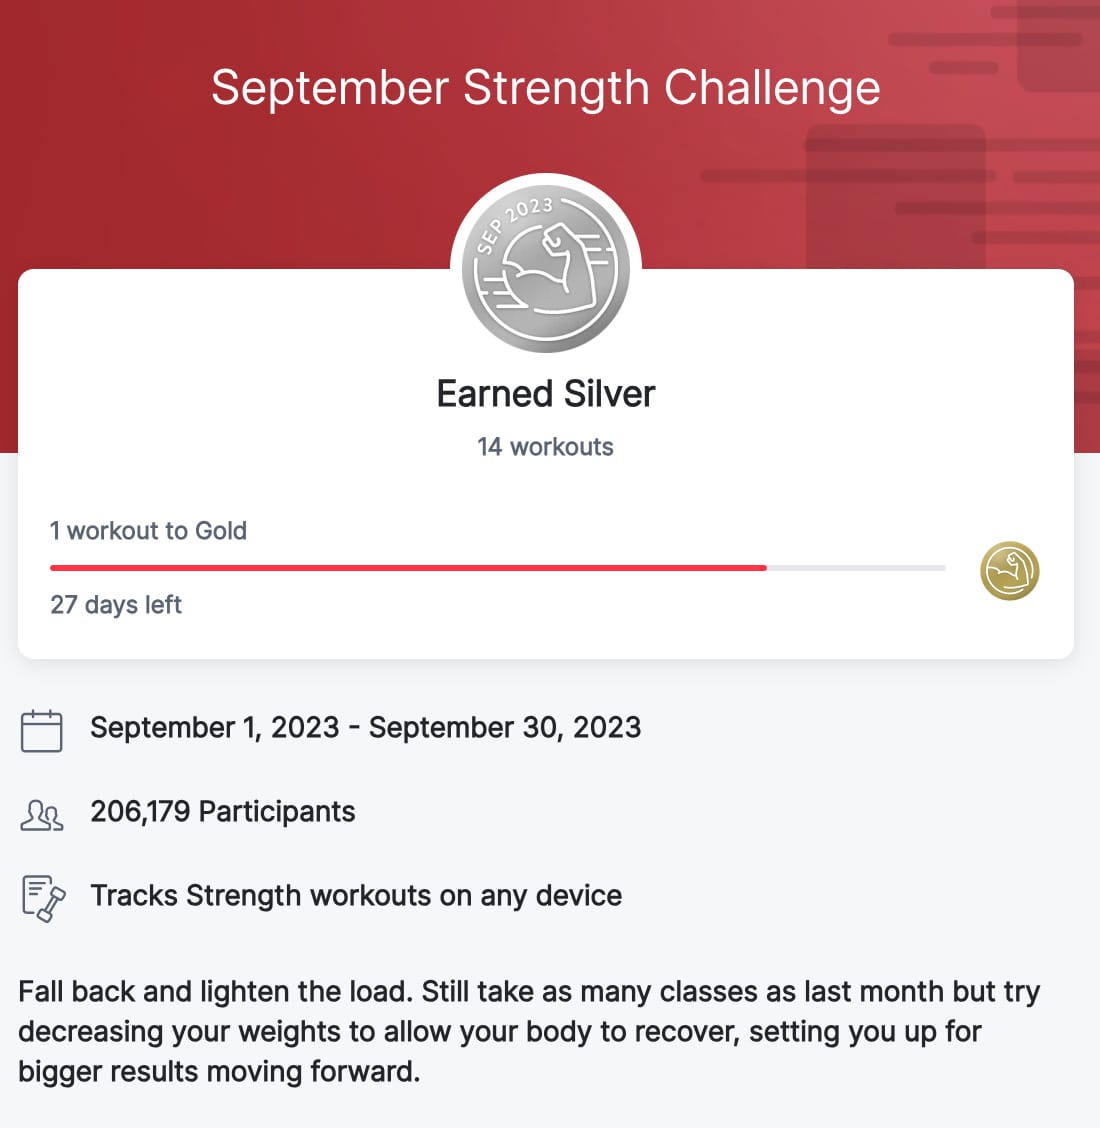 Peloton strength challenge showing silver earned for September, even though only 3 strength workouts have been completed this month.